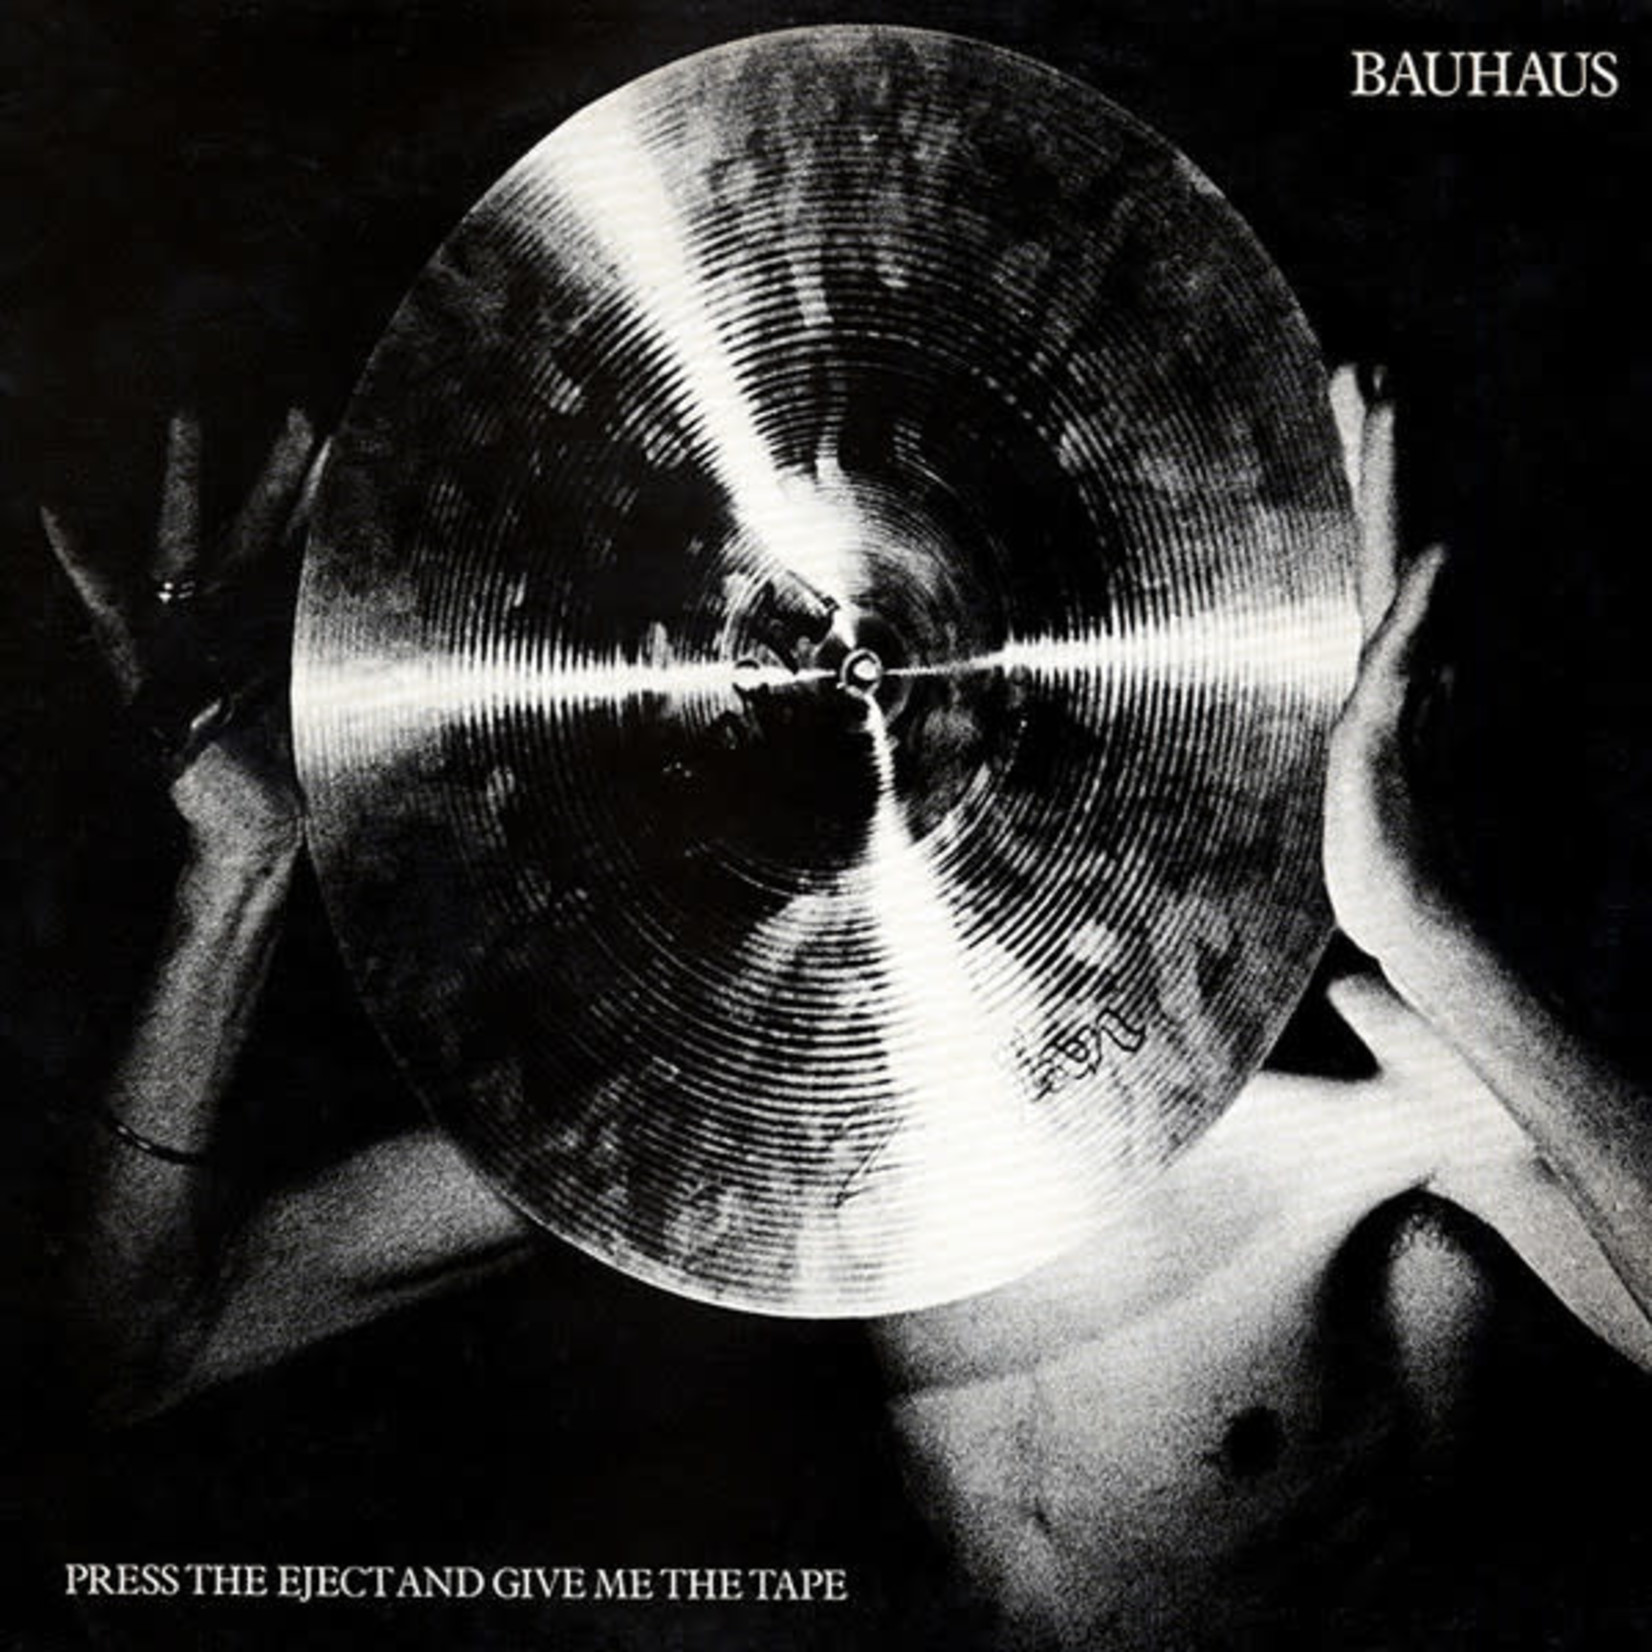 [New] Bauhaus: Press the Eject and Give Me the Tape (limited edition, white vinyl) [BEGGARS BANQUET]